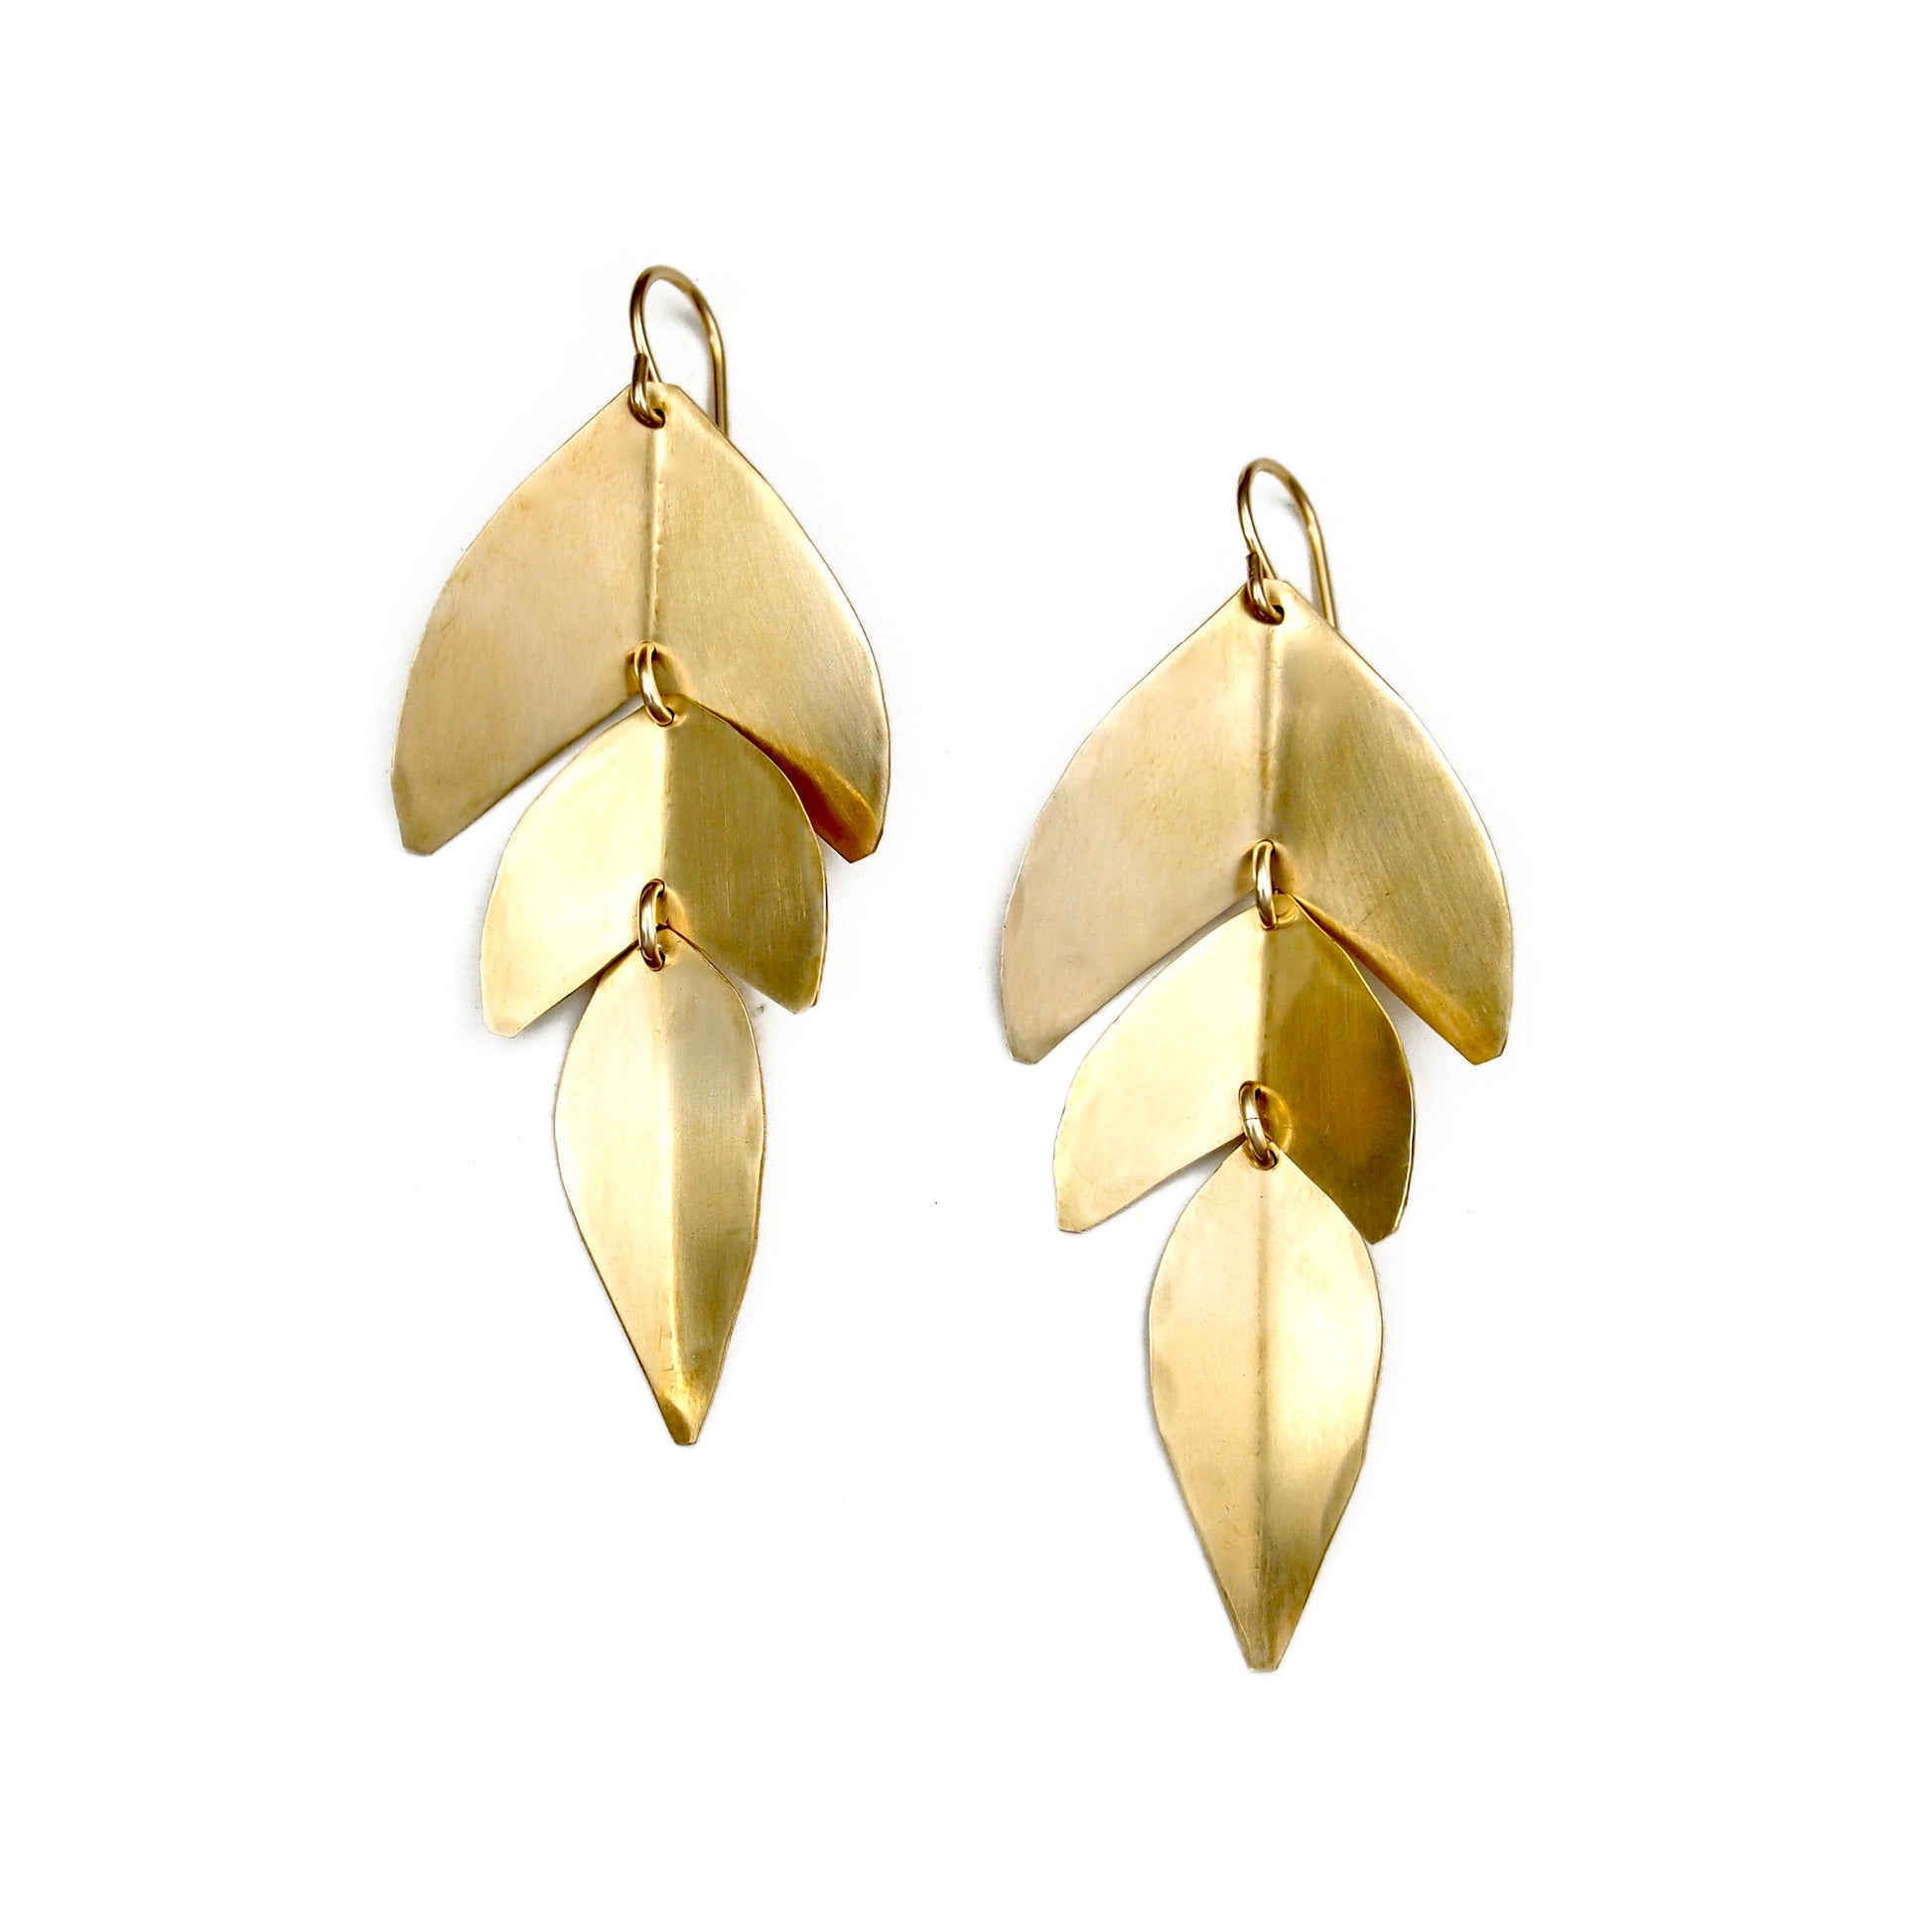 Gold leaf shaped dangle earrings made from hammered metal.